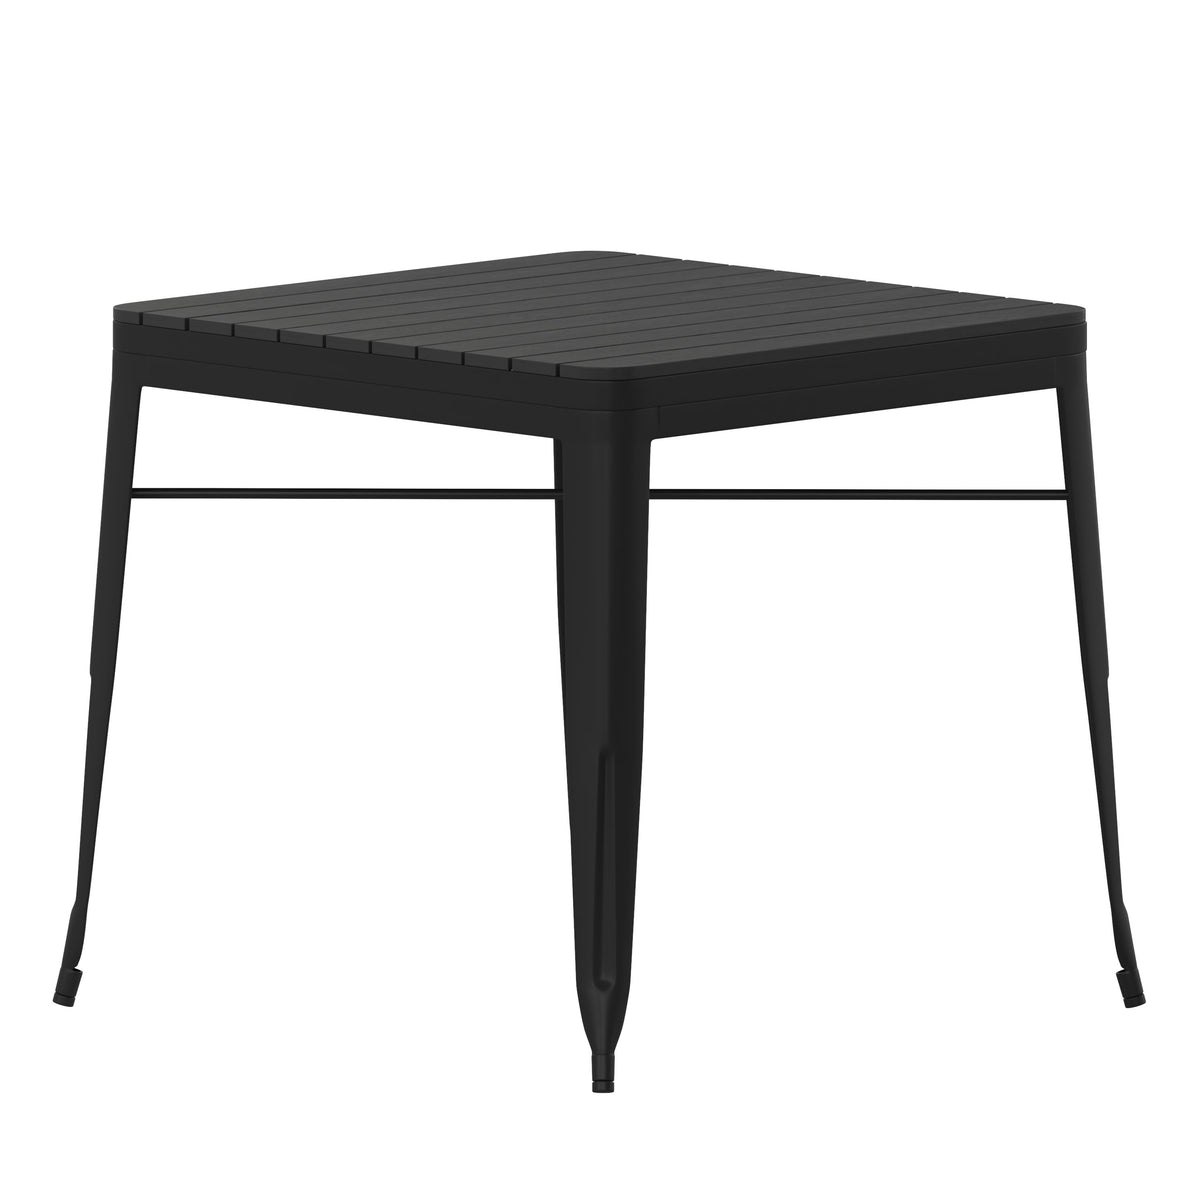 Black Top/Black Frame |#| Indoor/Outdoor Commercial Steel Patio Table with Poly Resin Slatted Top - Black